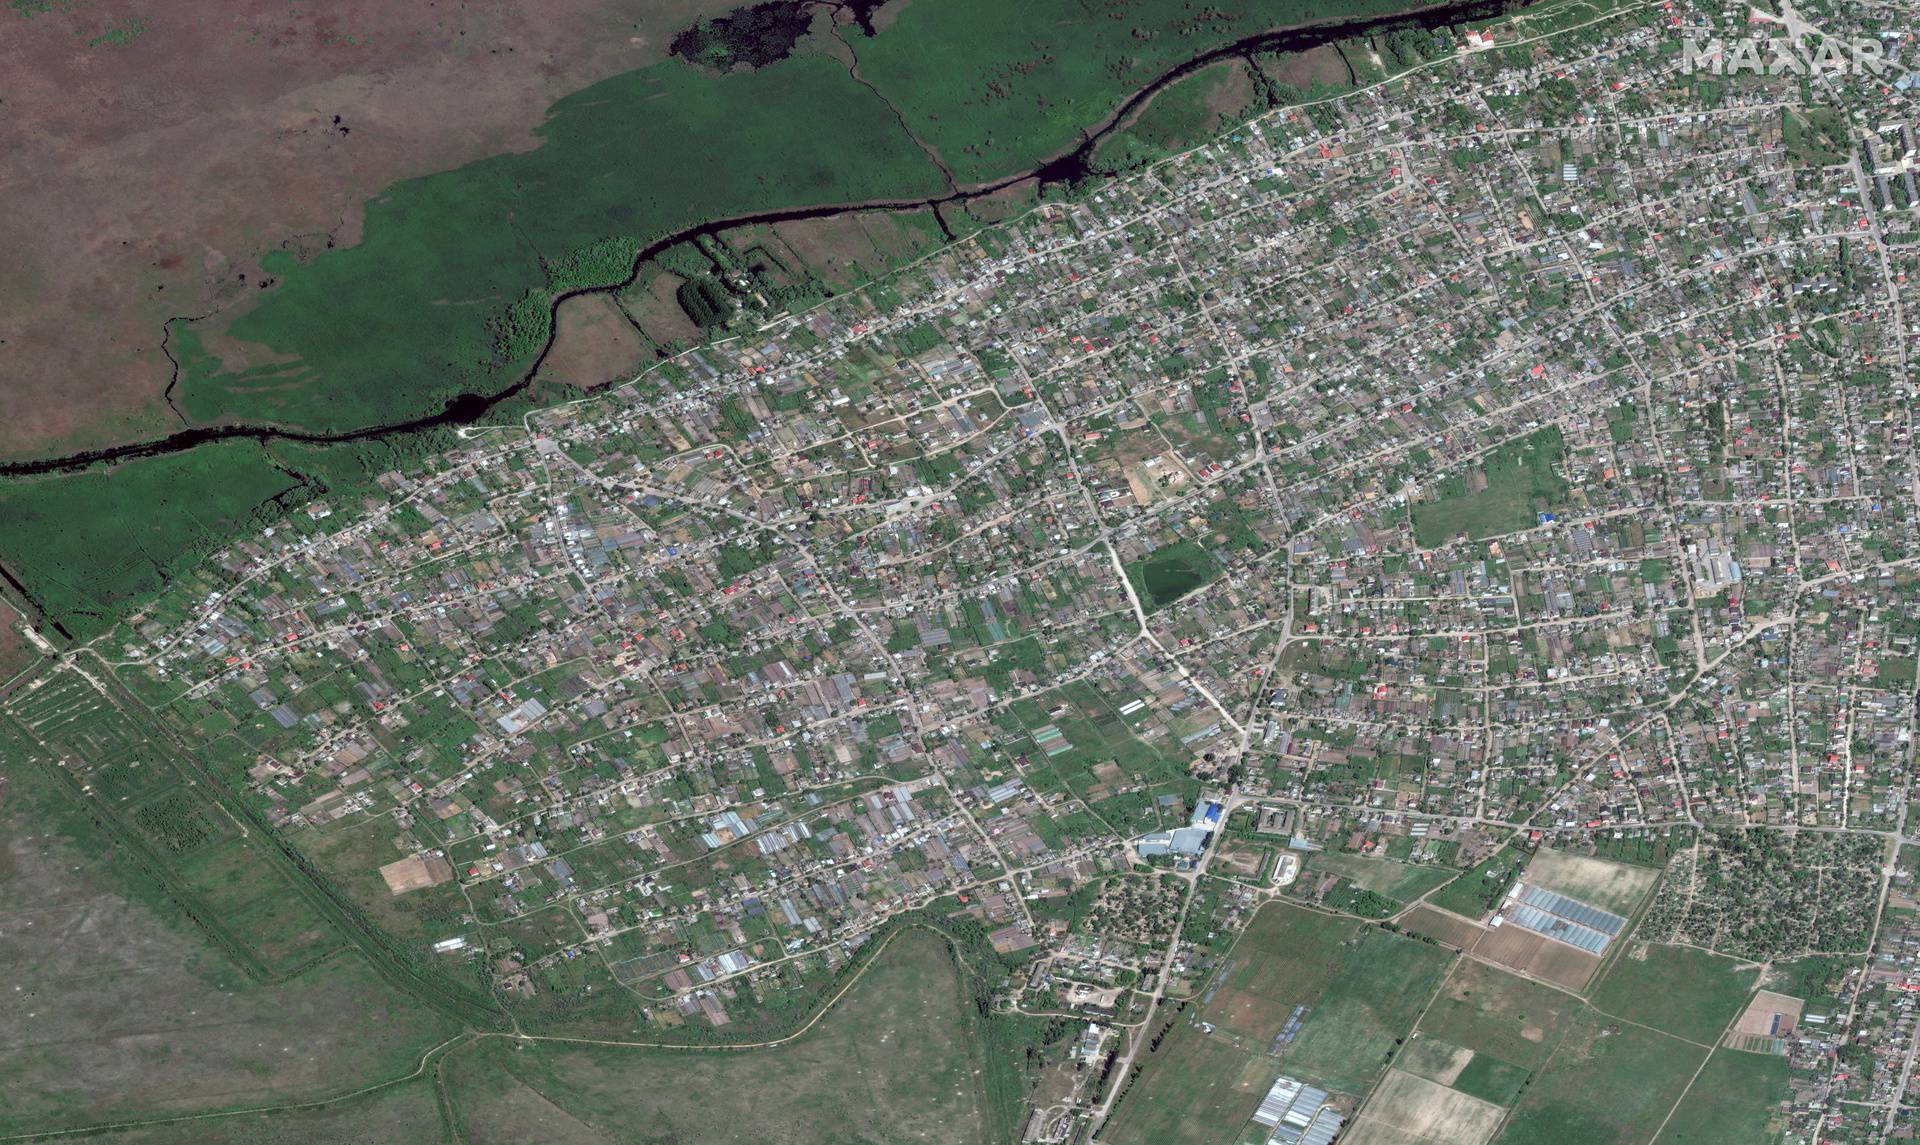 A satellite image shows the town of Oleshky